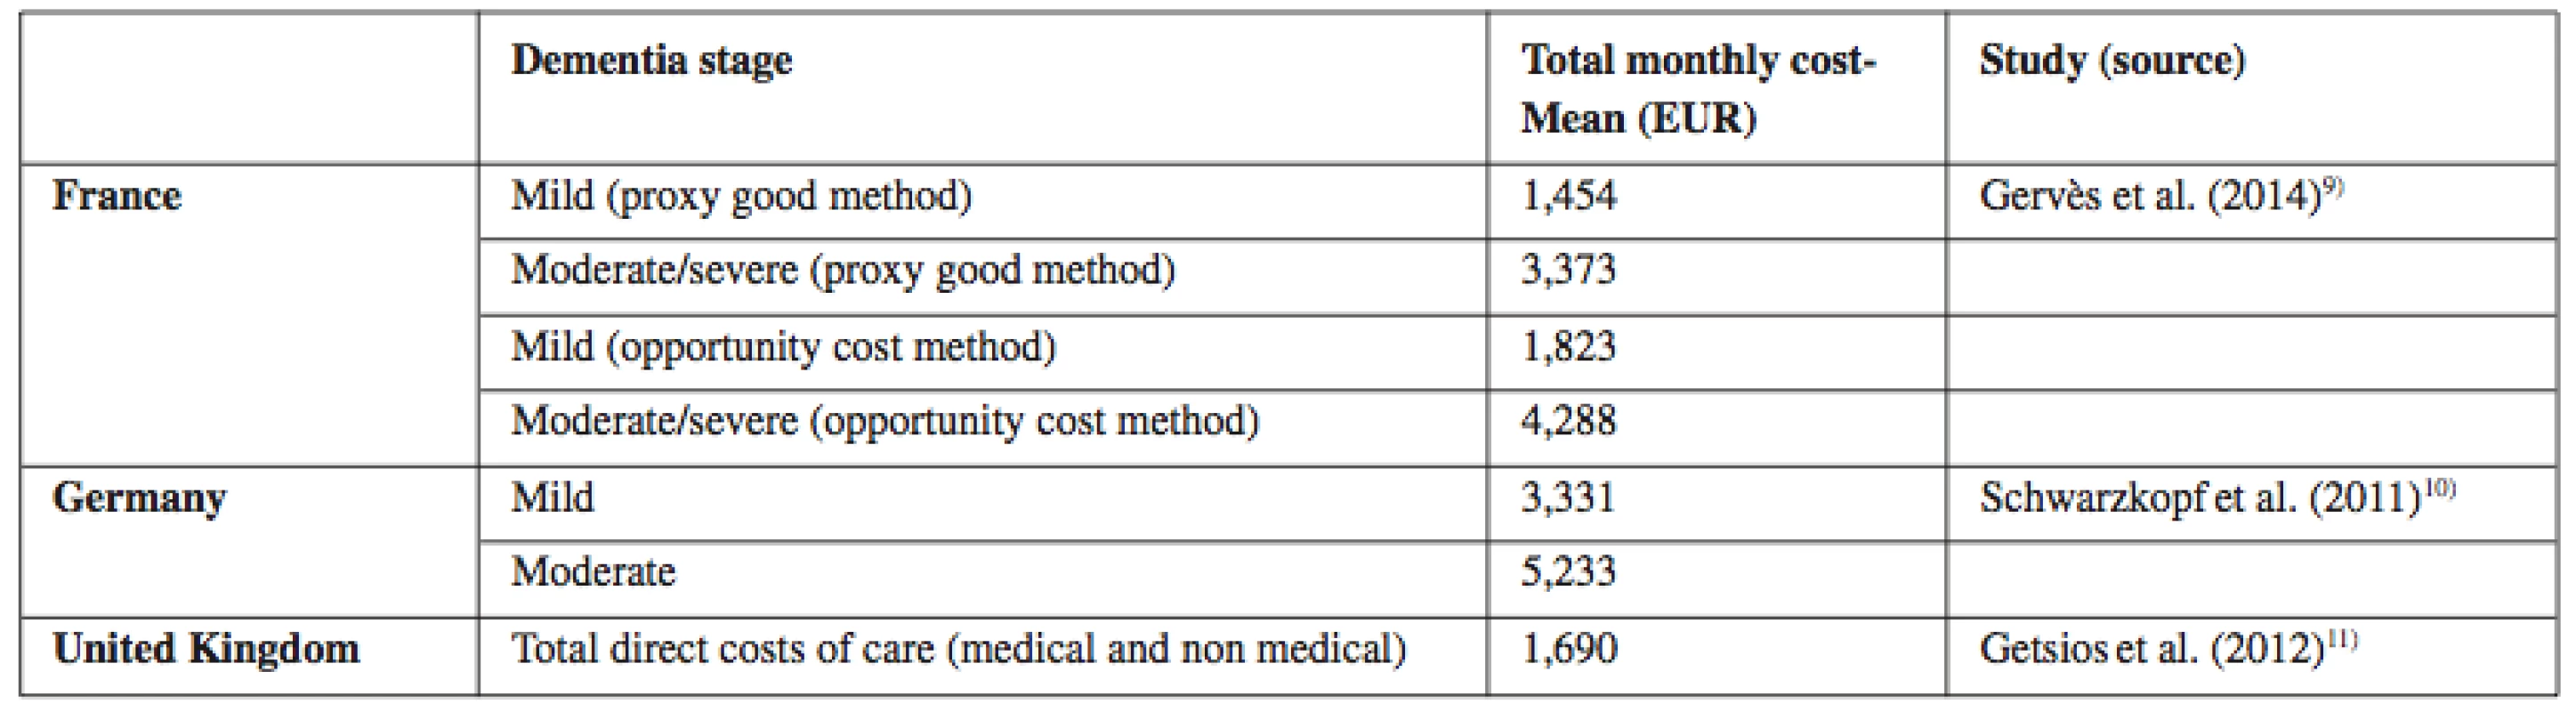 Direct costs of Alzheimer disease in chosen European countries according to the dementia stage